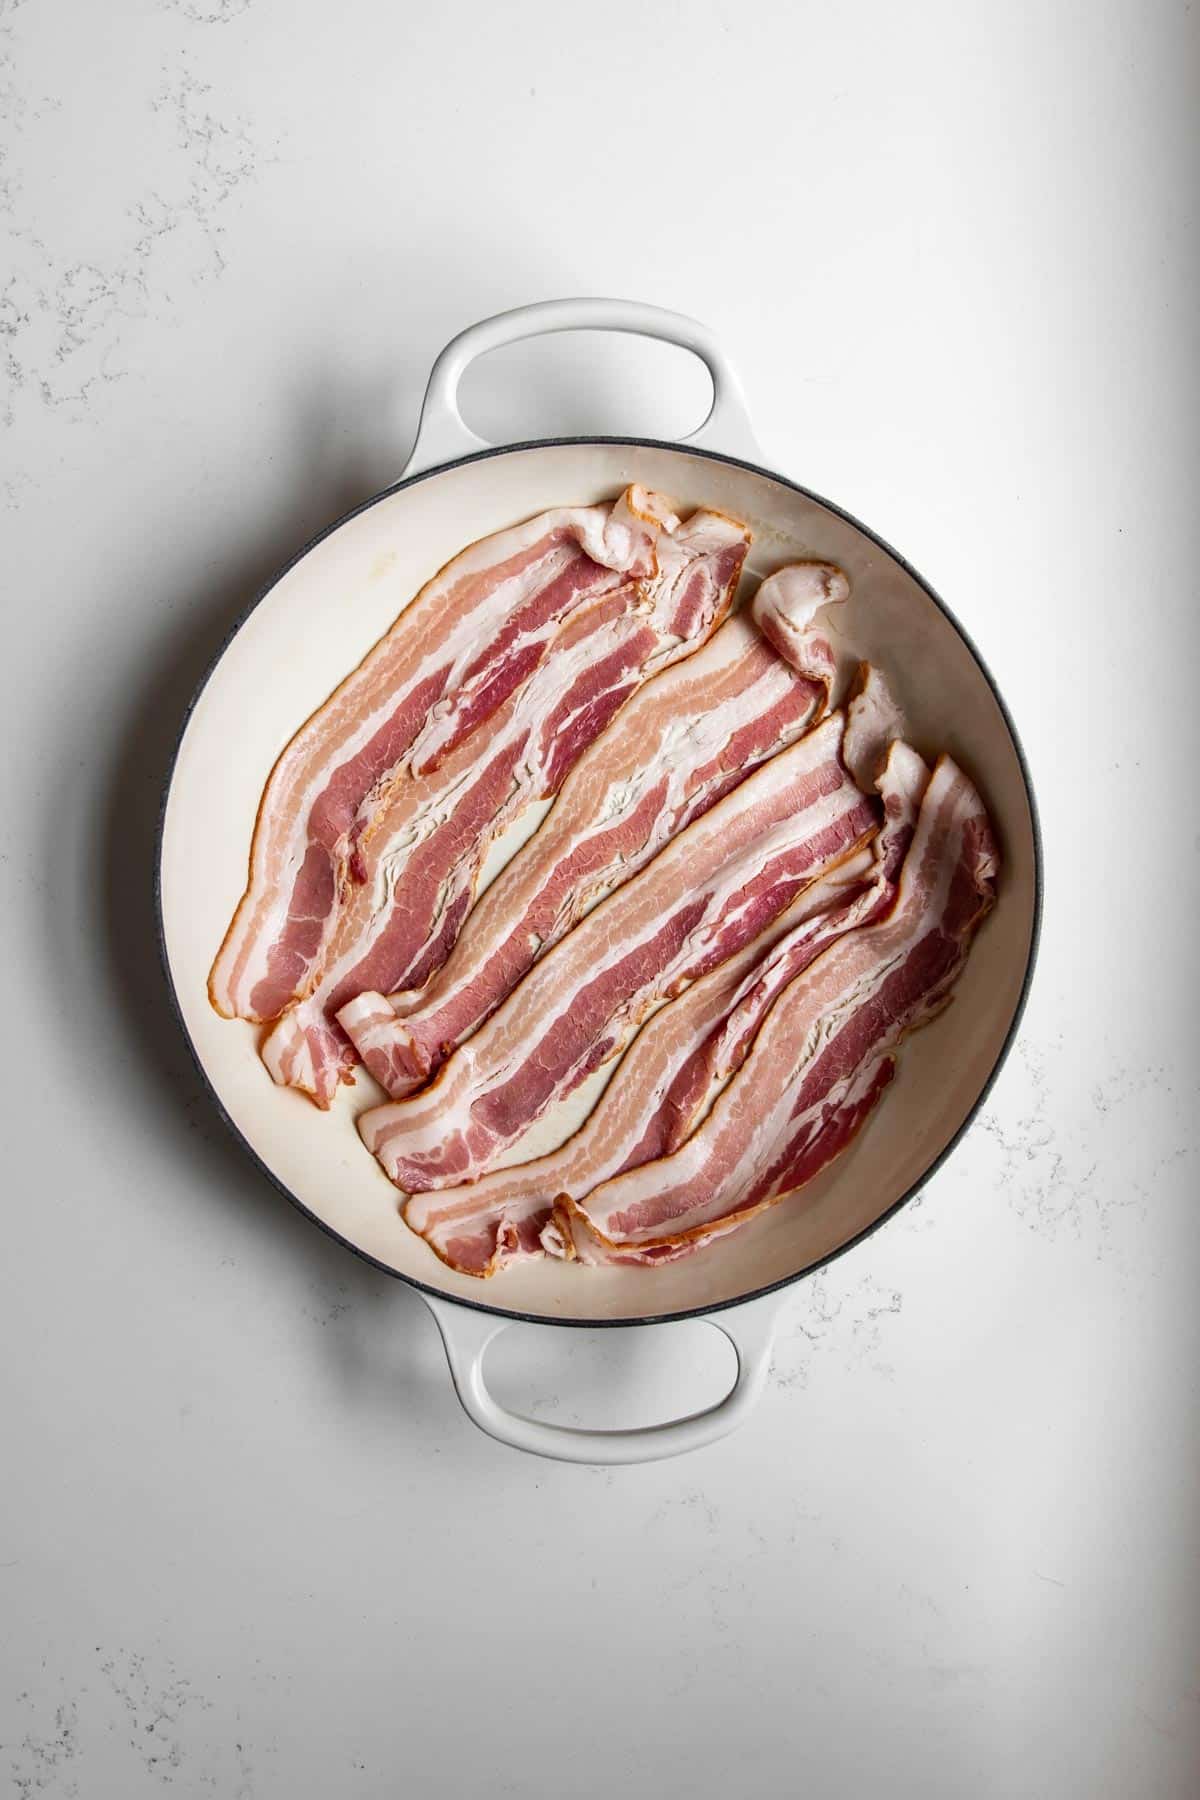 Strips of bacon in a pan on a white marble table cooking.